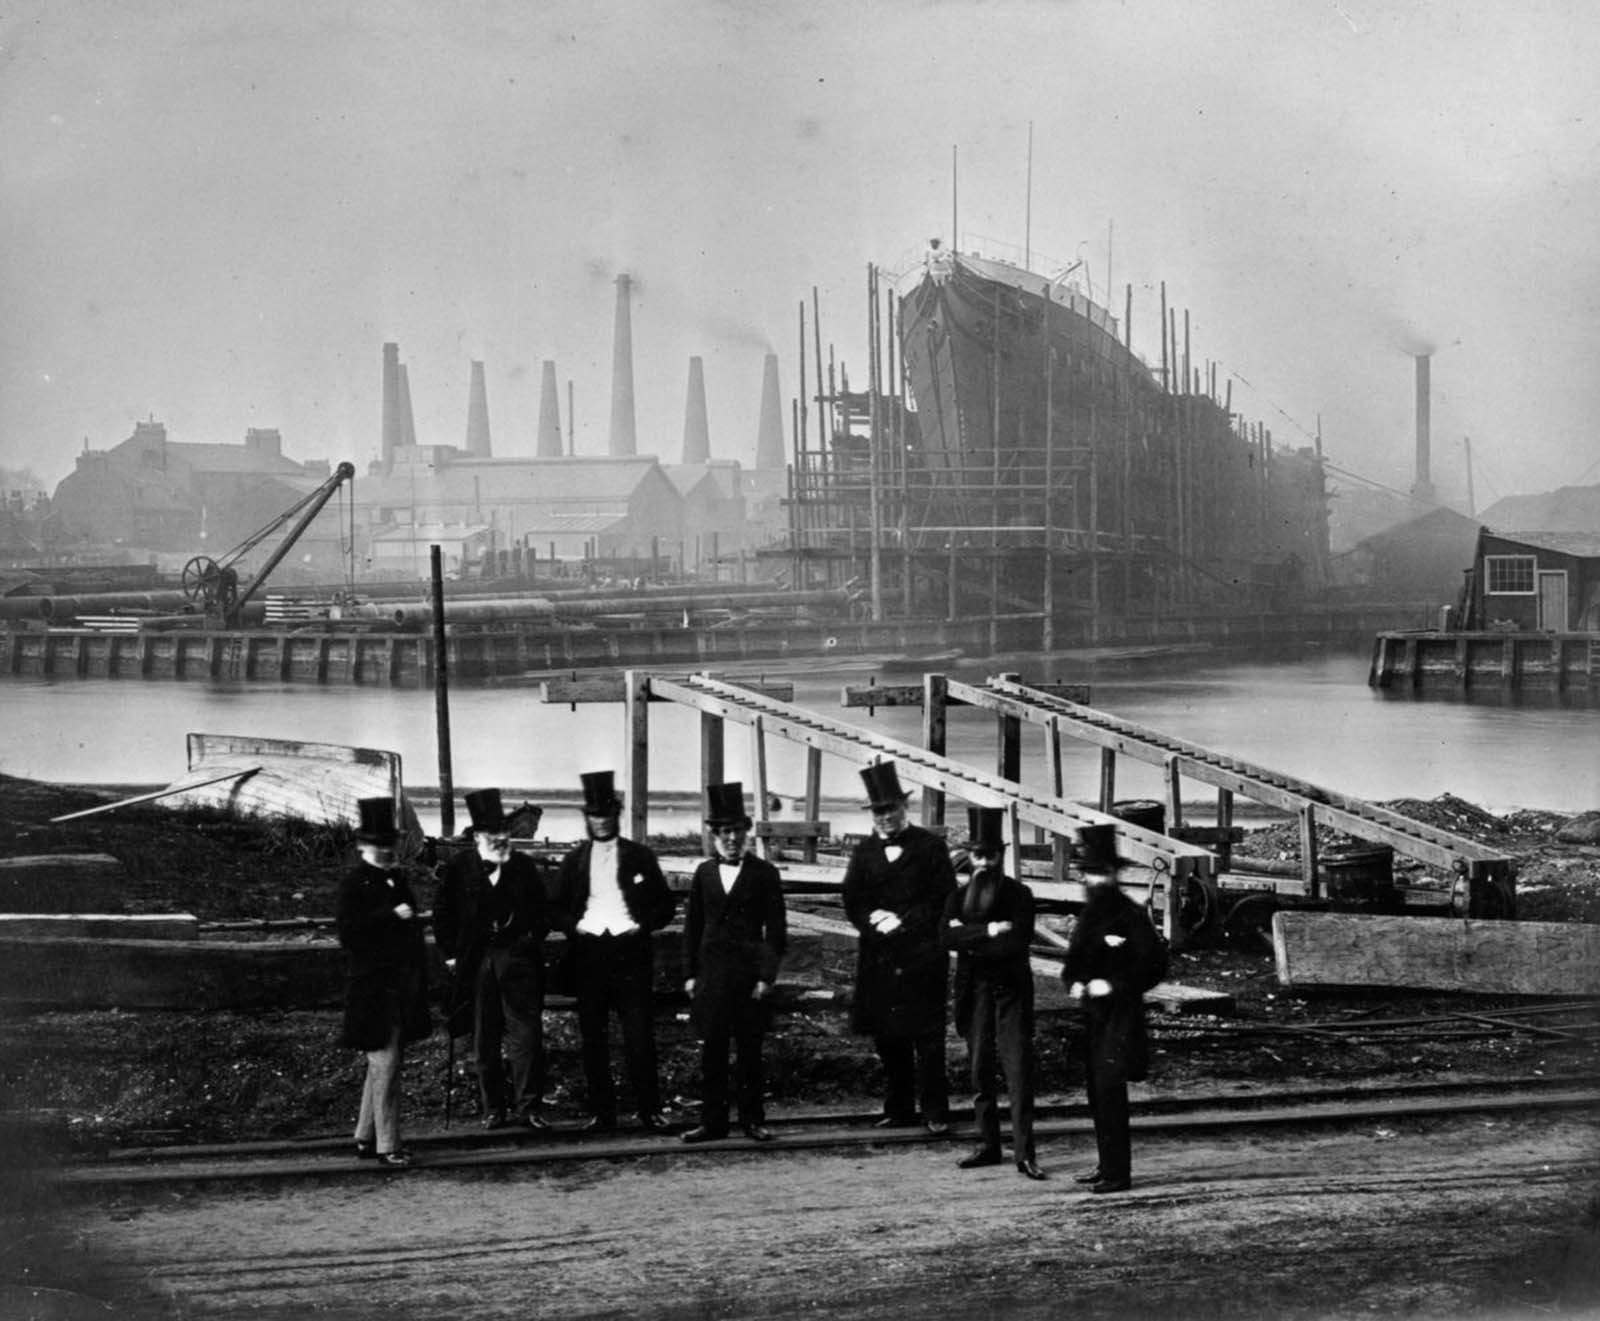 Historical Photos of Shipyards that built the Revolutionary Steamships, 1860-1900